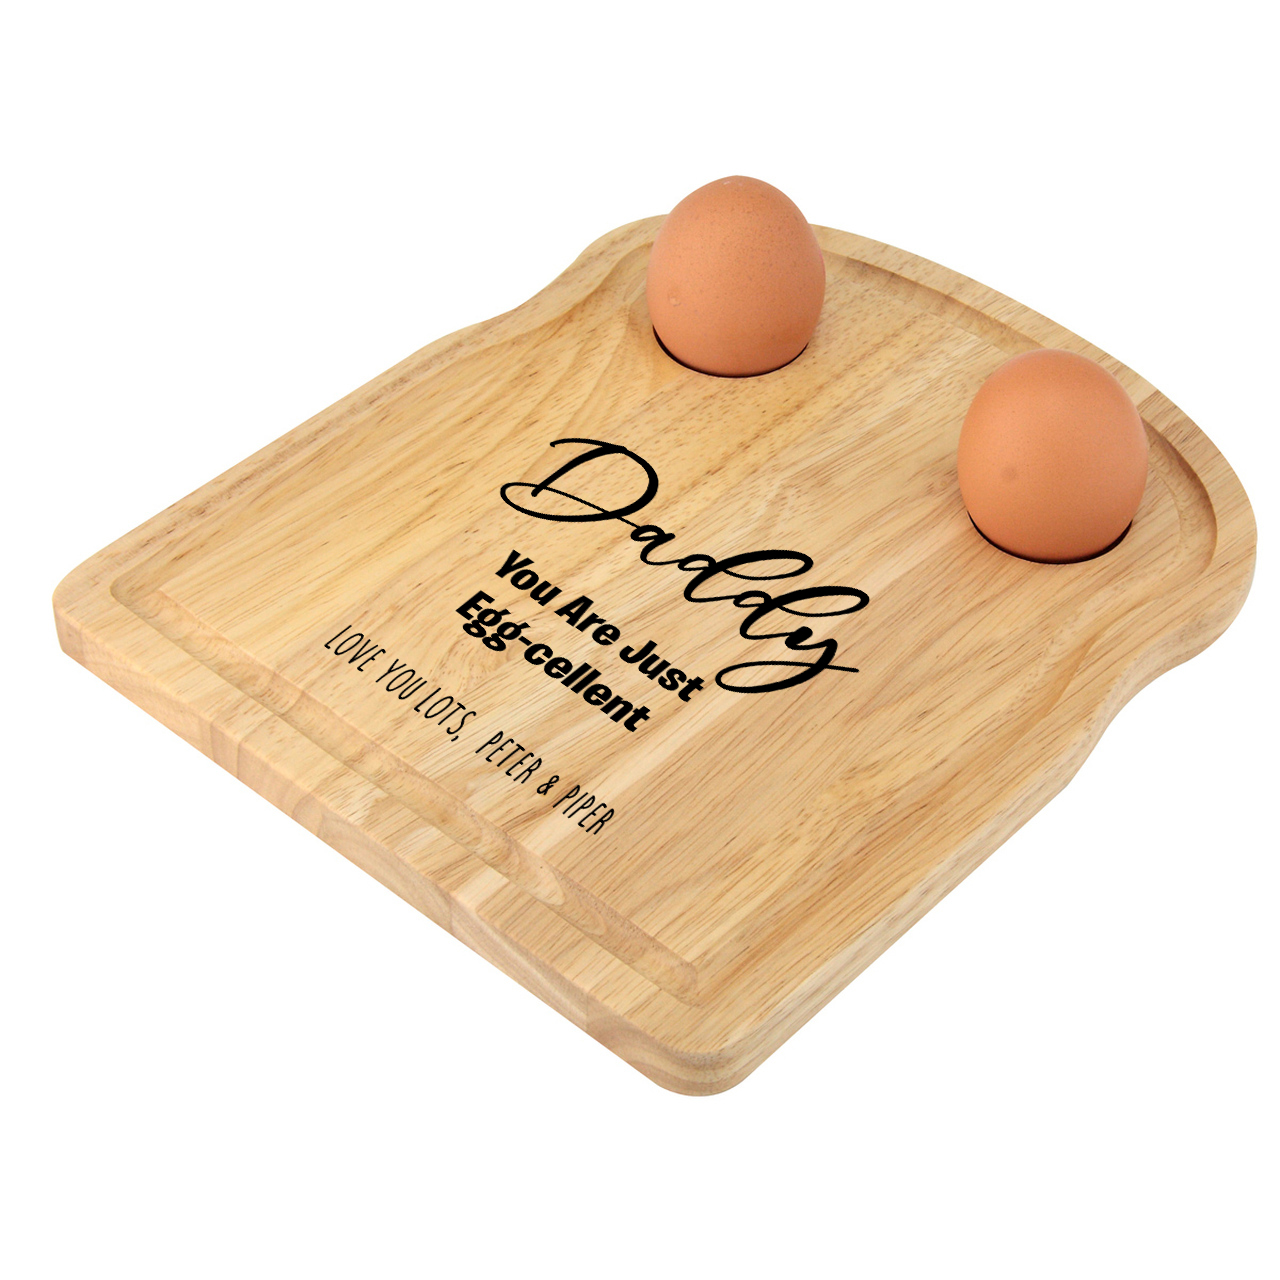 Wooden Loaf Egg Board with egg-cellent personalised